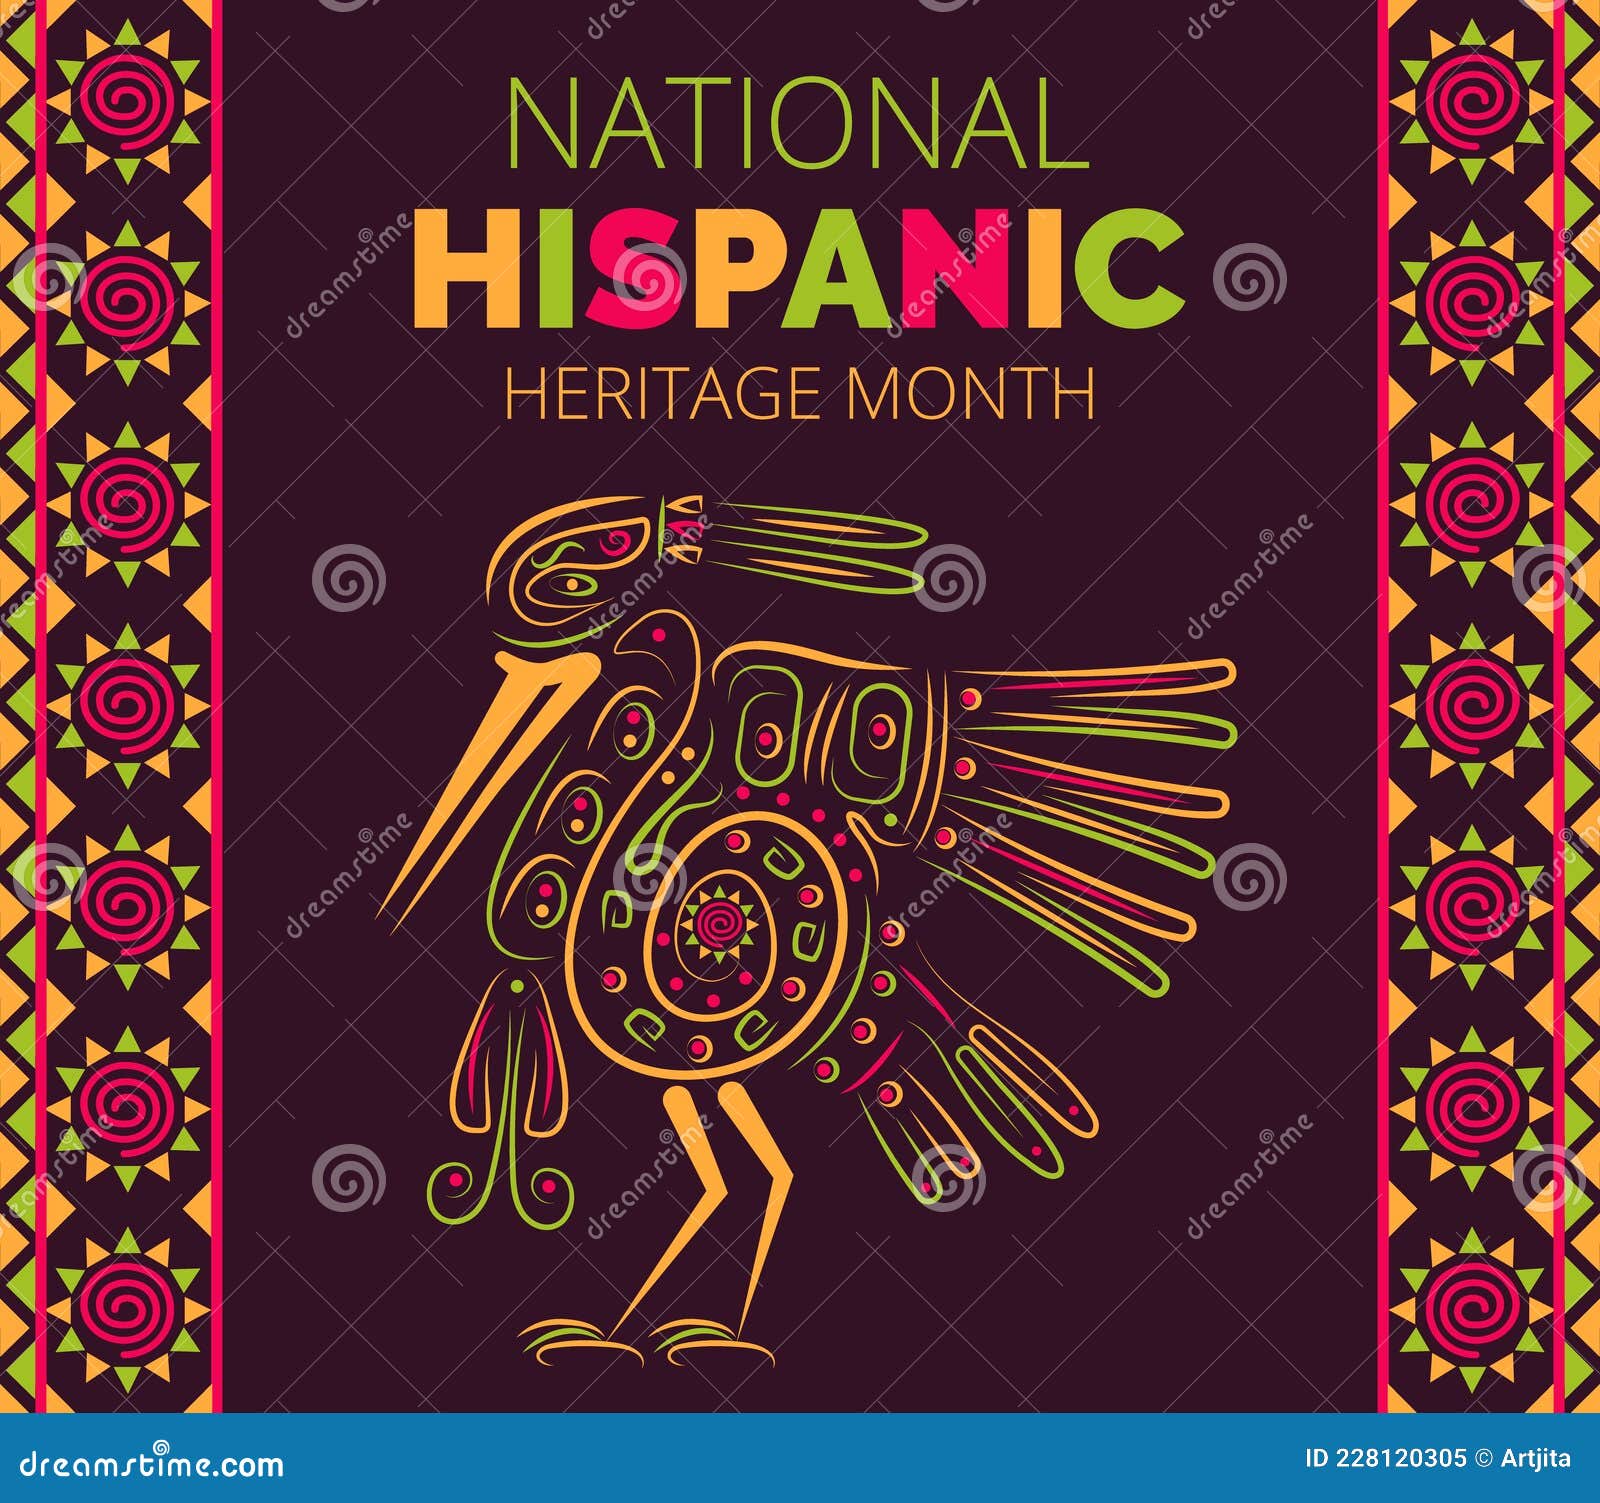 national hispanic heritage month celebrated from 15 september to 15 october usa